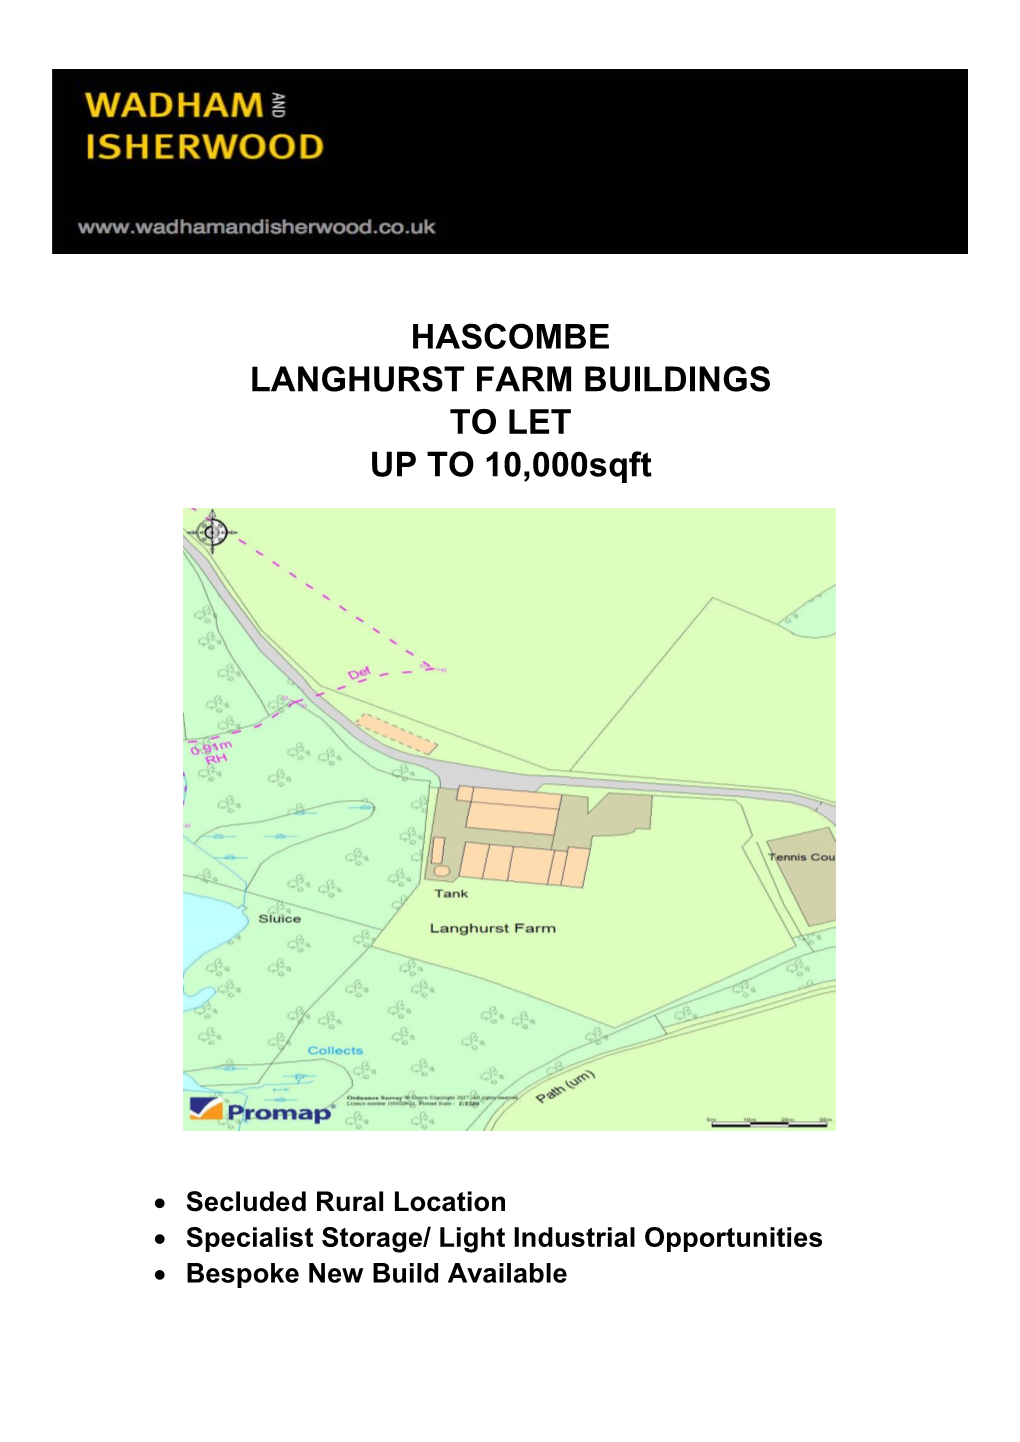 HASCOMBE LANGHURST FARM BUILDINGS to LET up to 10,000Sqft